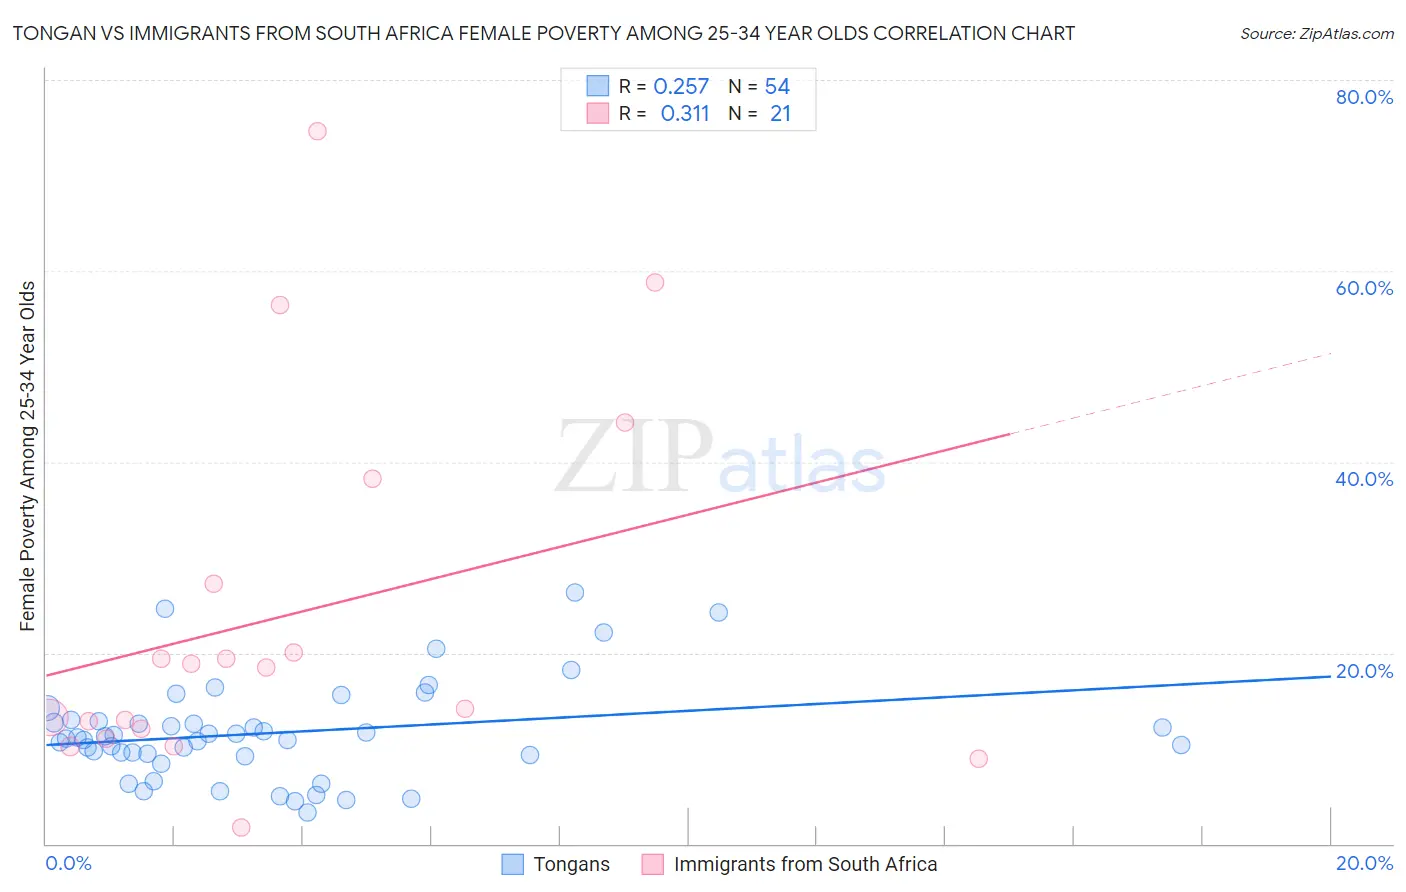 Tongan vs Immigrants from South Africa Female Poverty Among 25-34 Year Olds